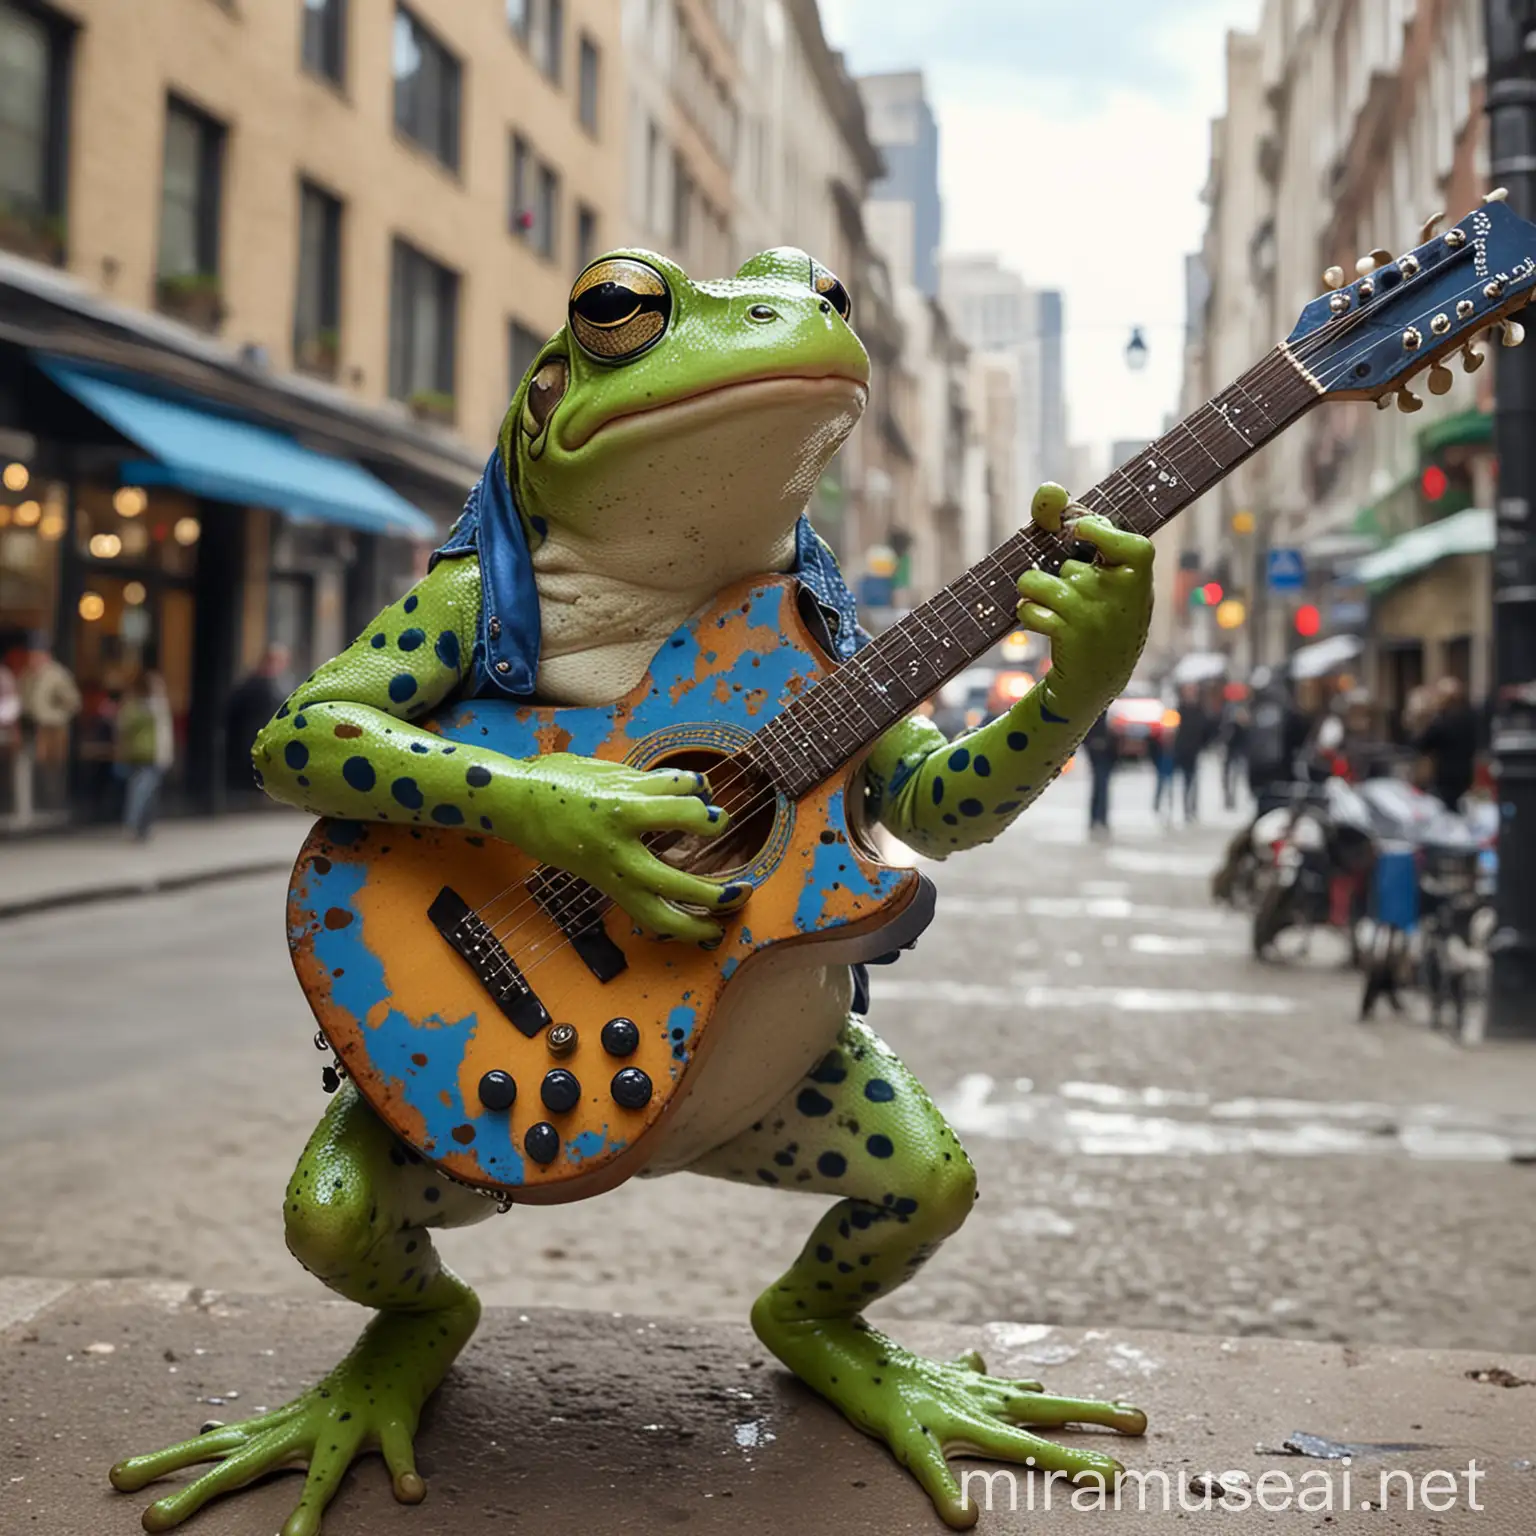 Urban Serenade Green Frog Playing Guitar in Busy City